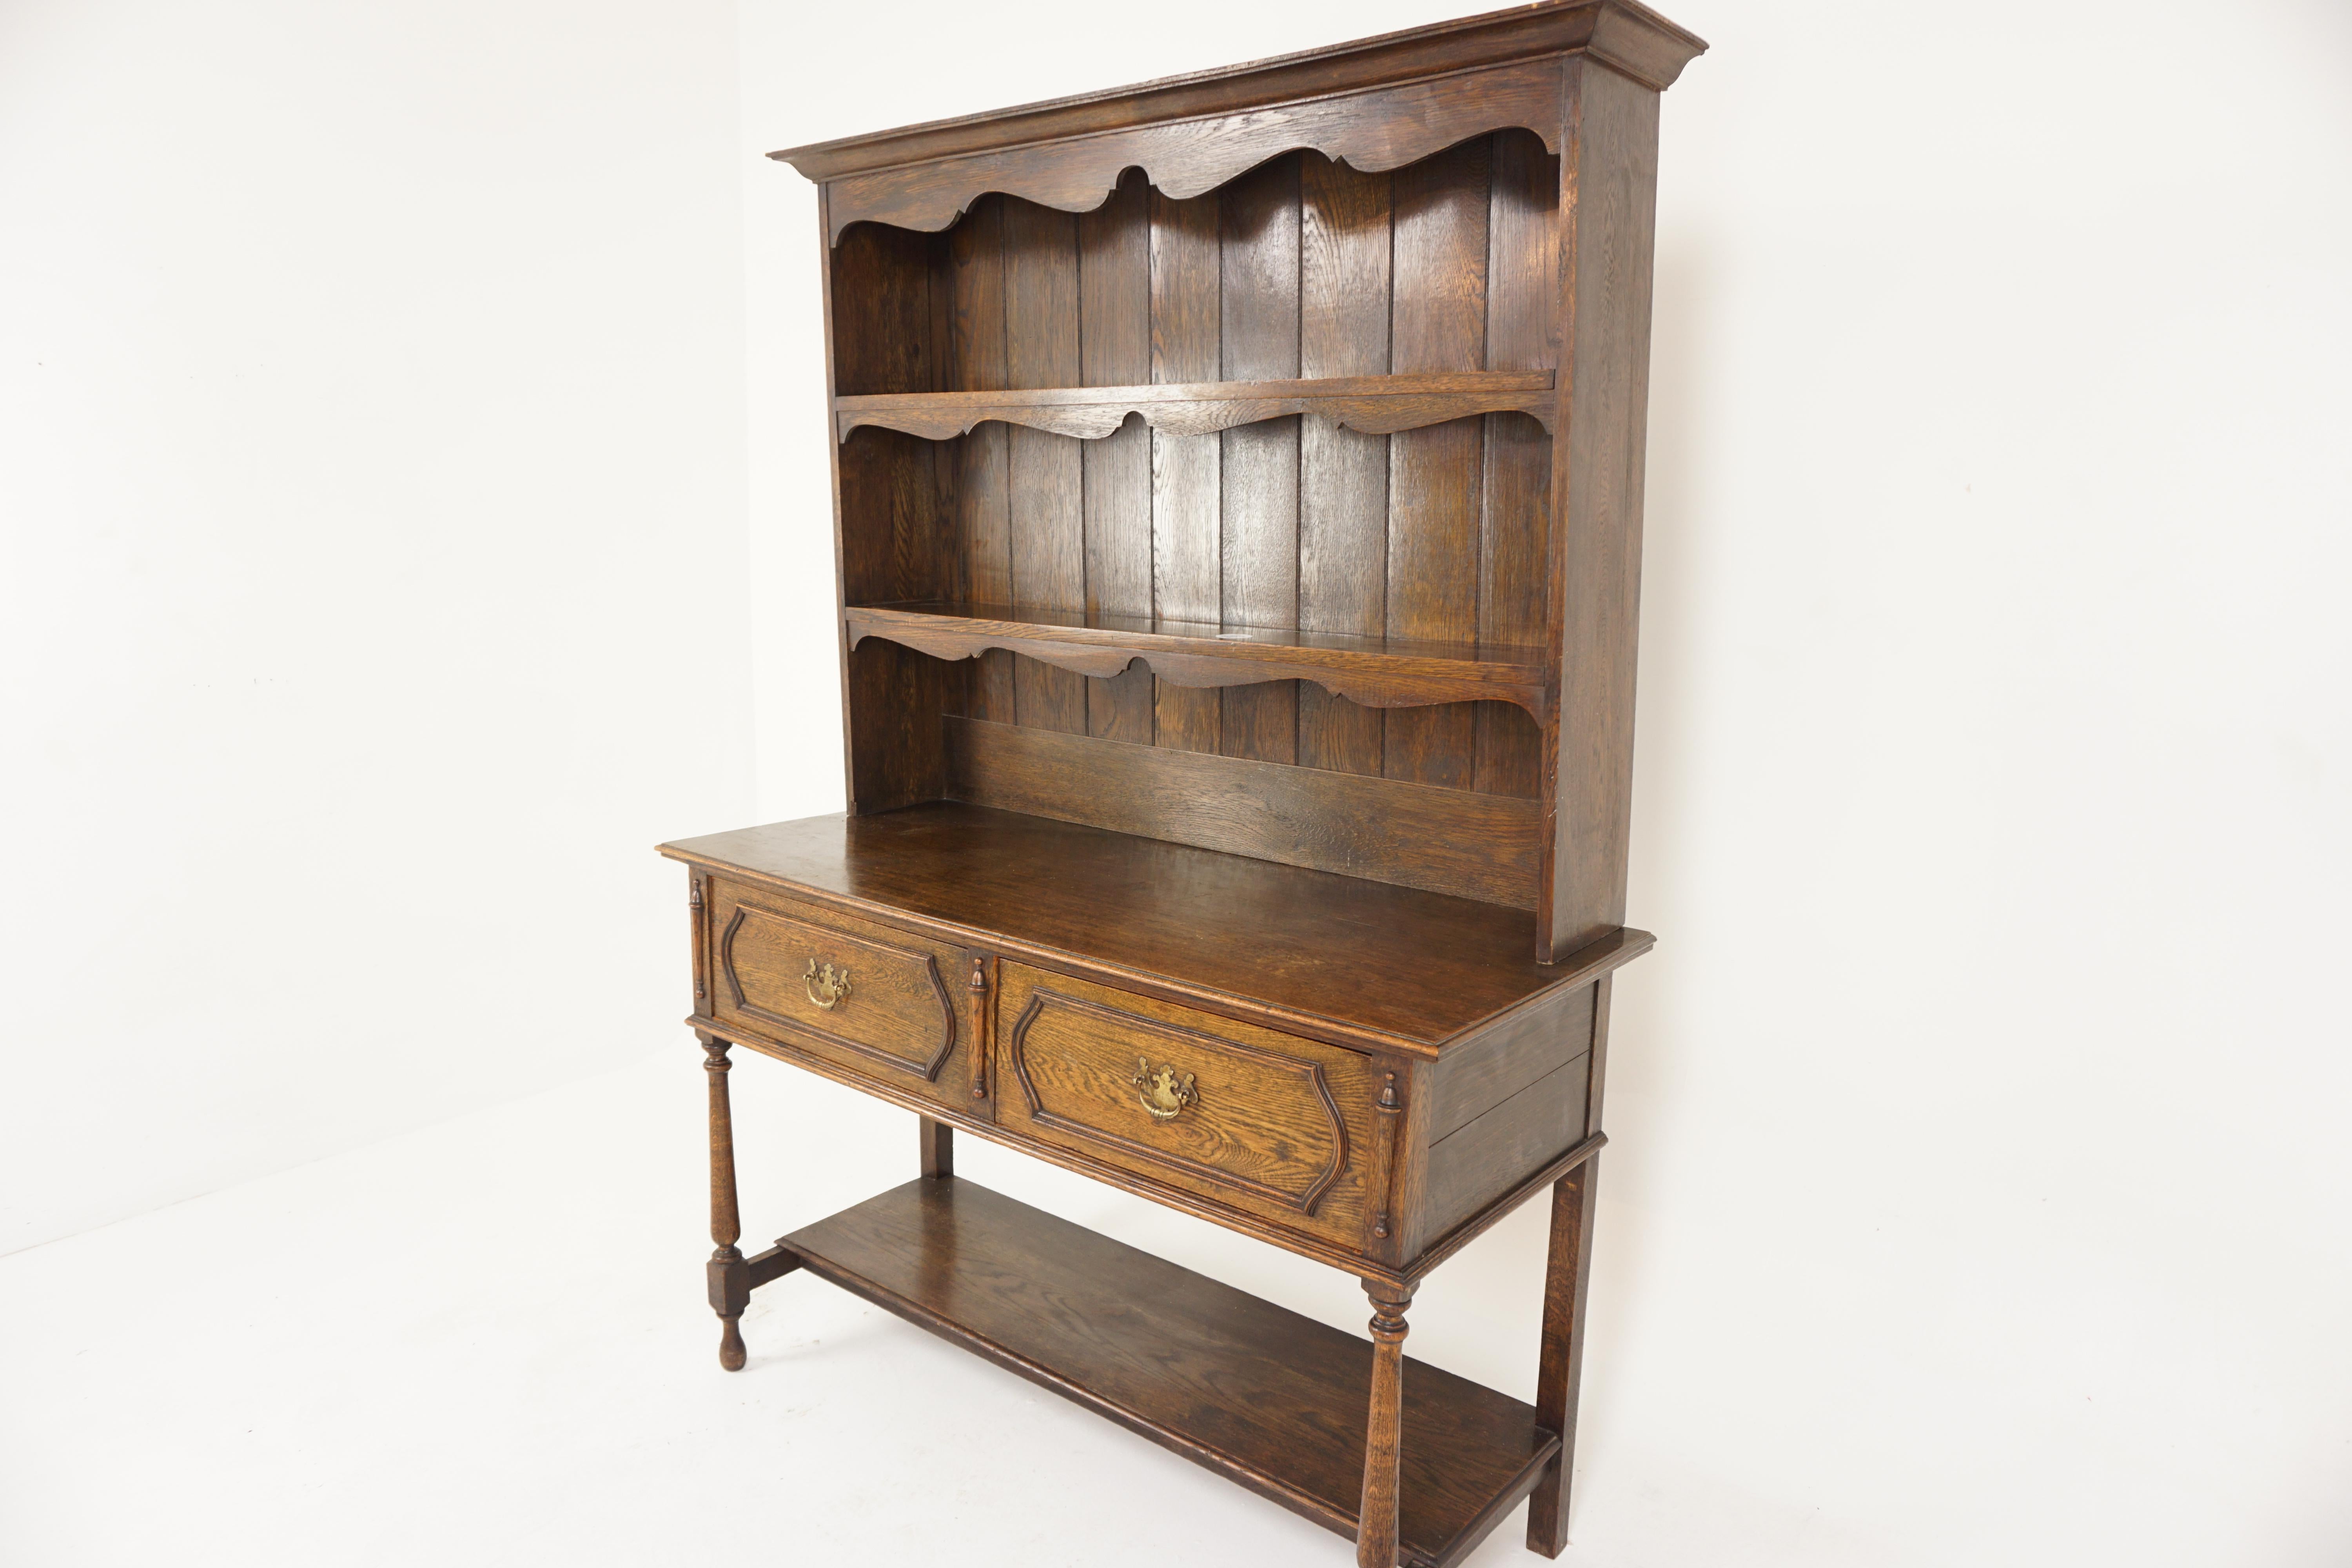 Antique Oak Welsh dresser, sideboard, buffet and Hutch, Scotland 1910, H799

Scotland 1910
Solid Oak
Original finish
Moulded cornice with wavy frieze underneath
Oak vertical slats to the back
Pair of open shelves with groove on top
Base with